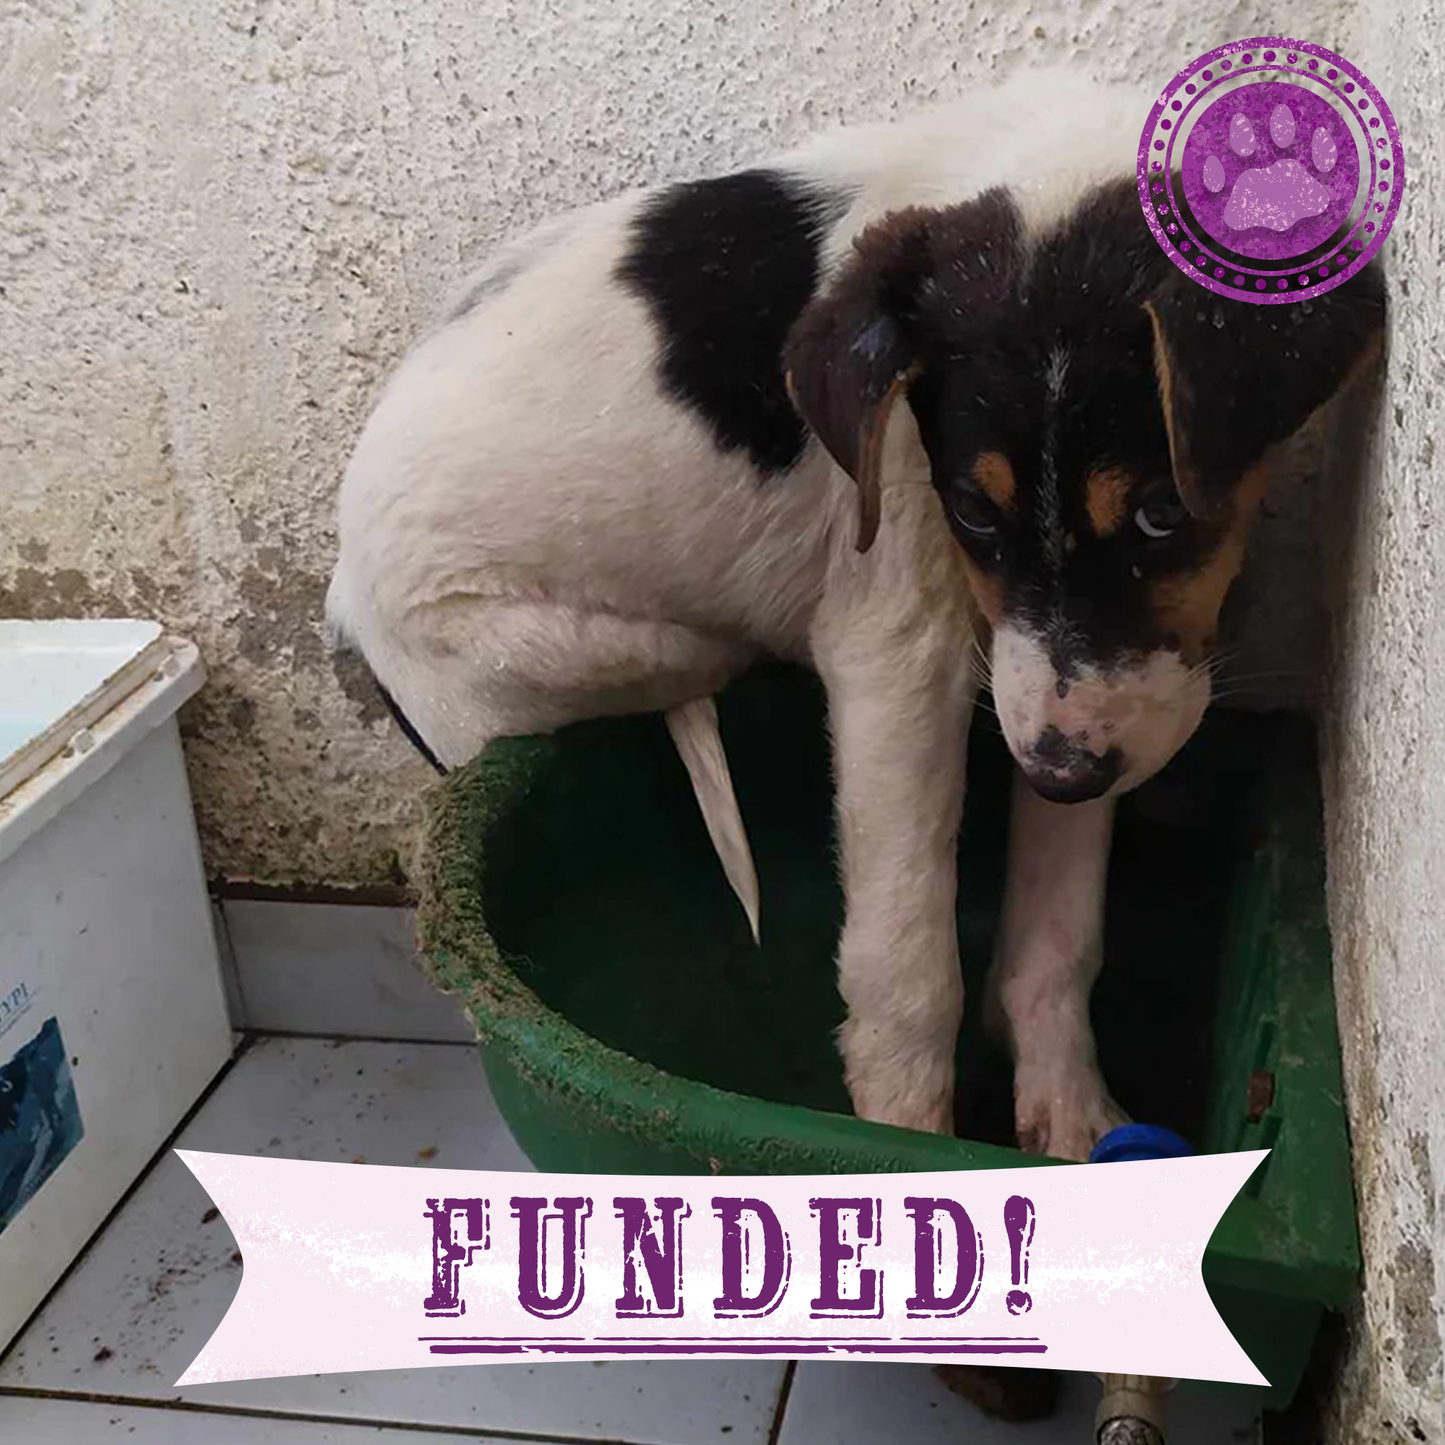 Funded: Maya Is Giving Up Hope And Needs Your Help